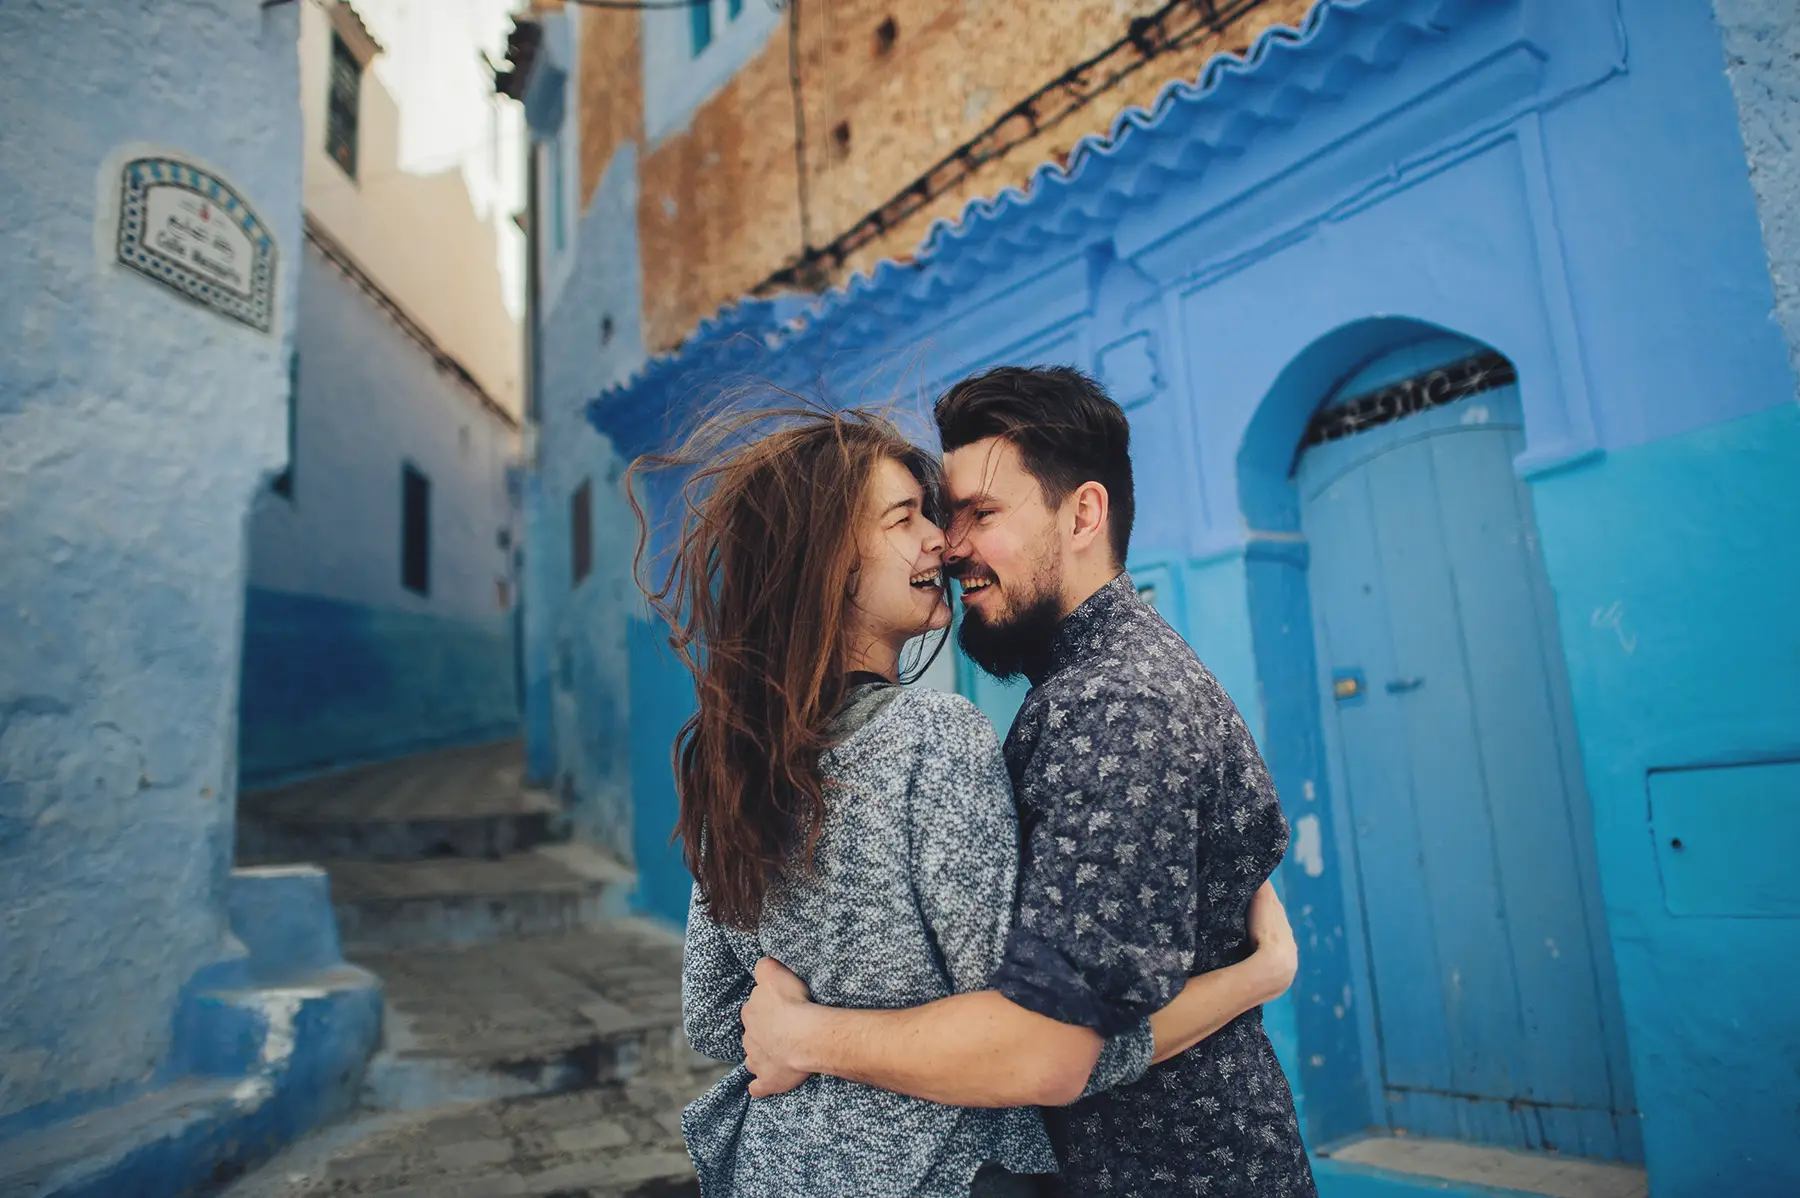 A couple in Chefchaouen